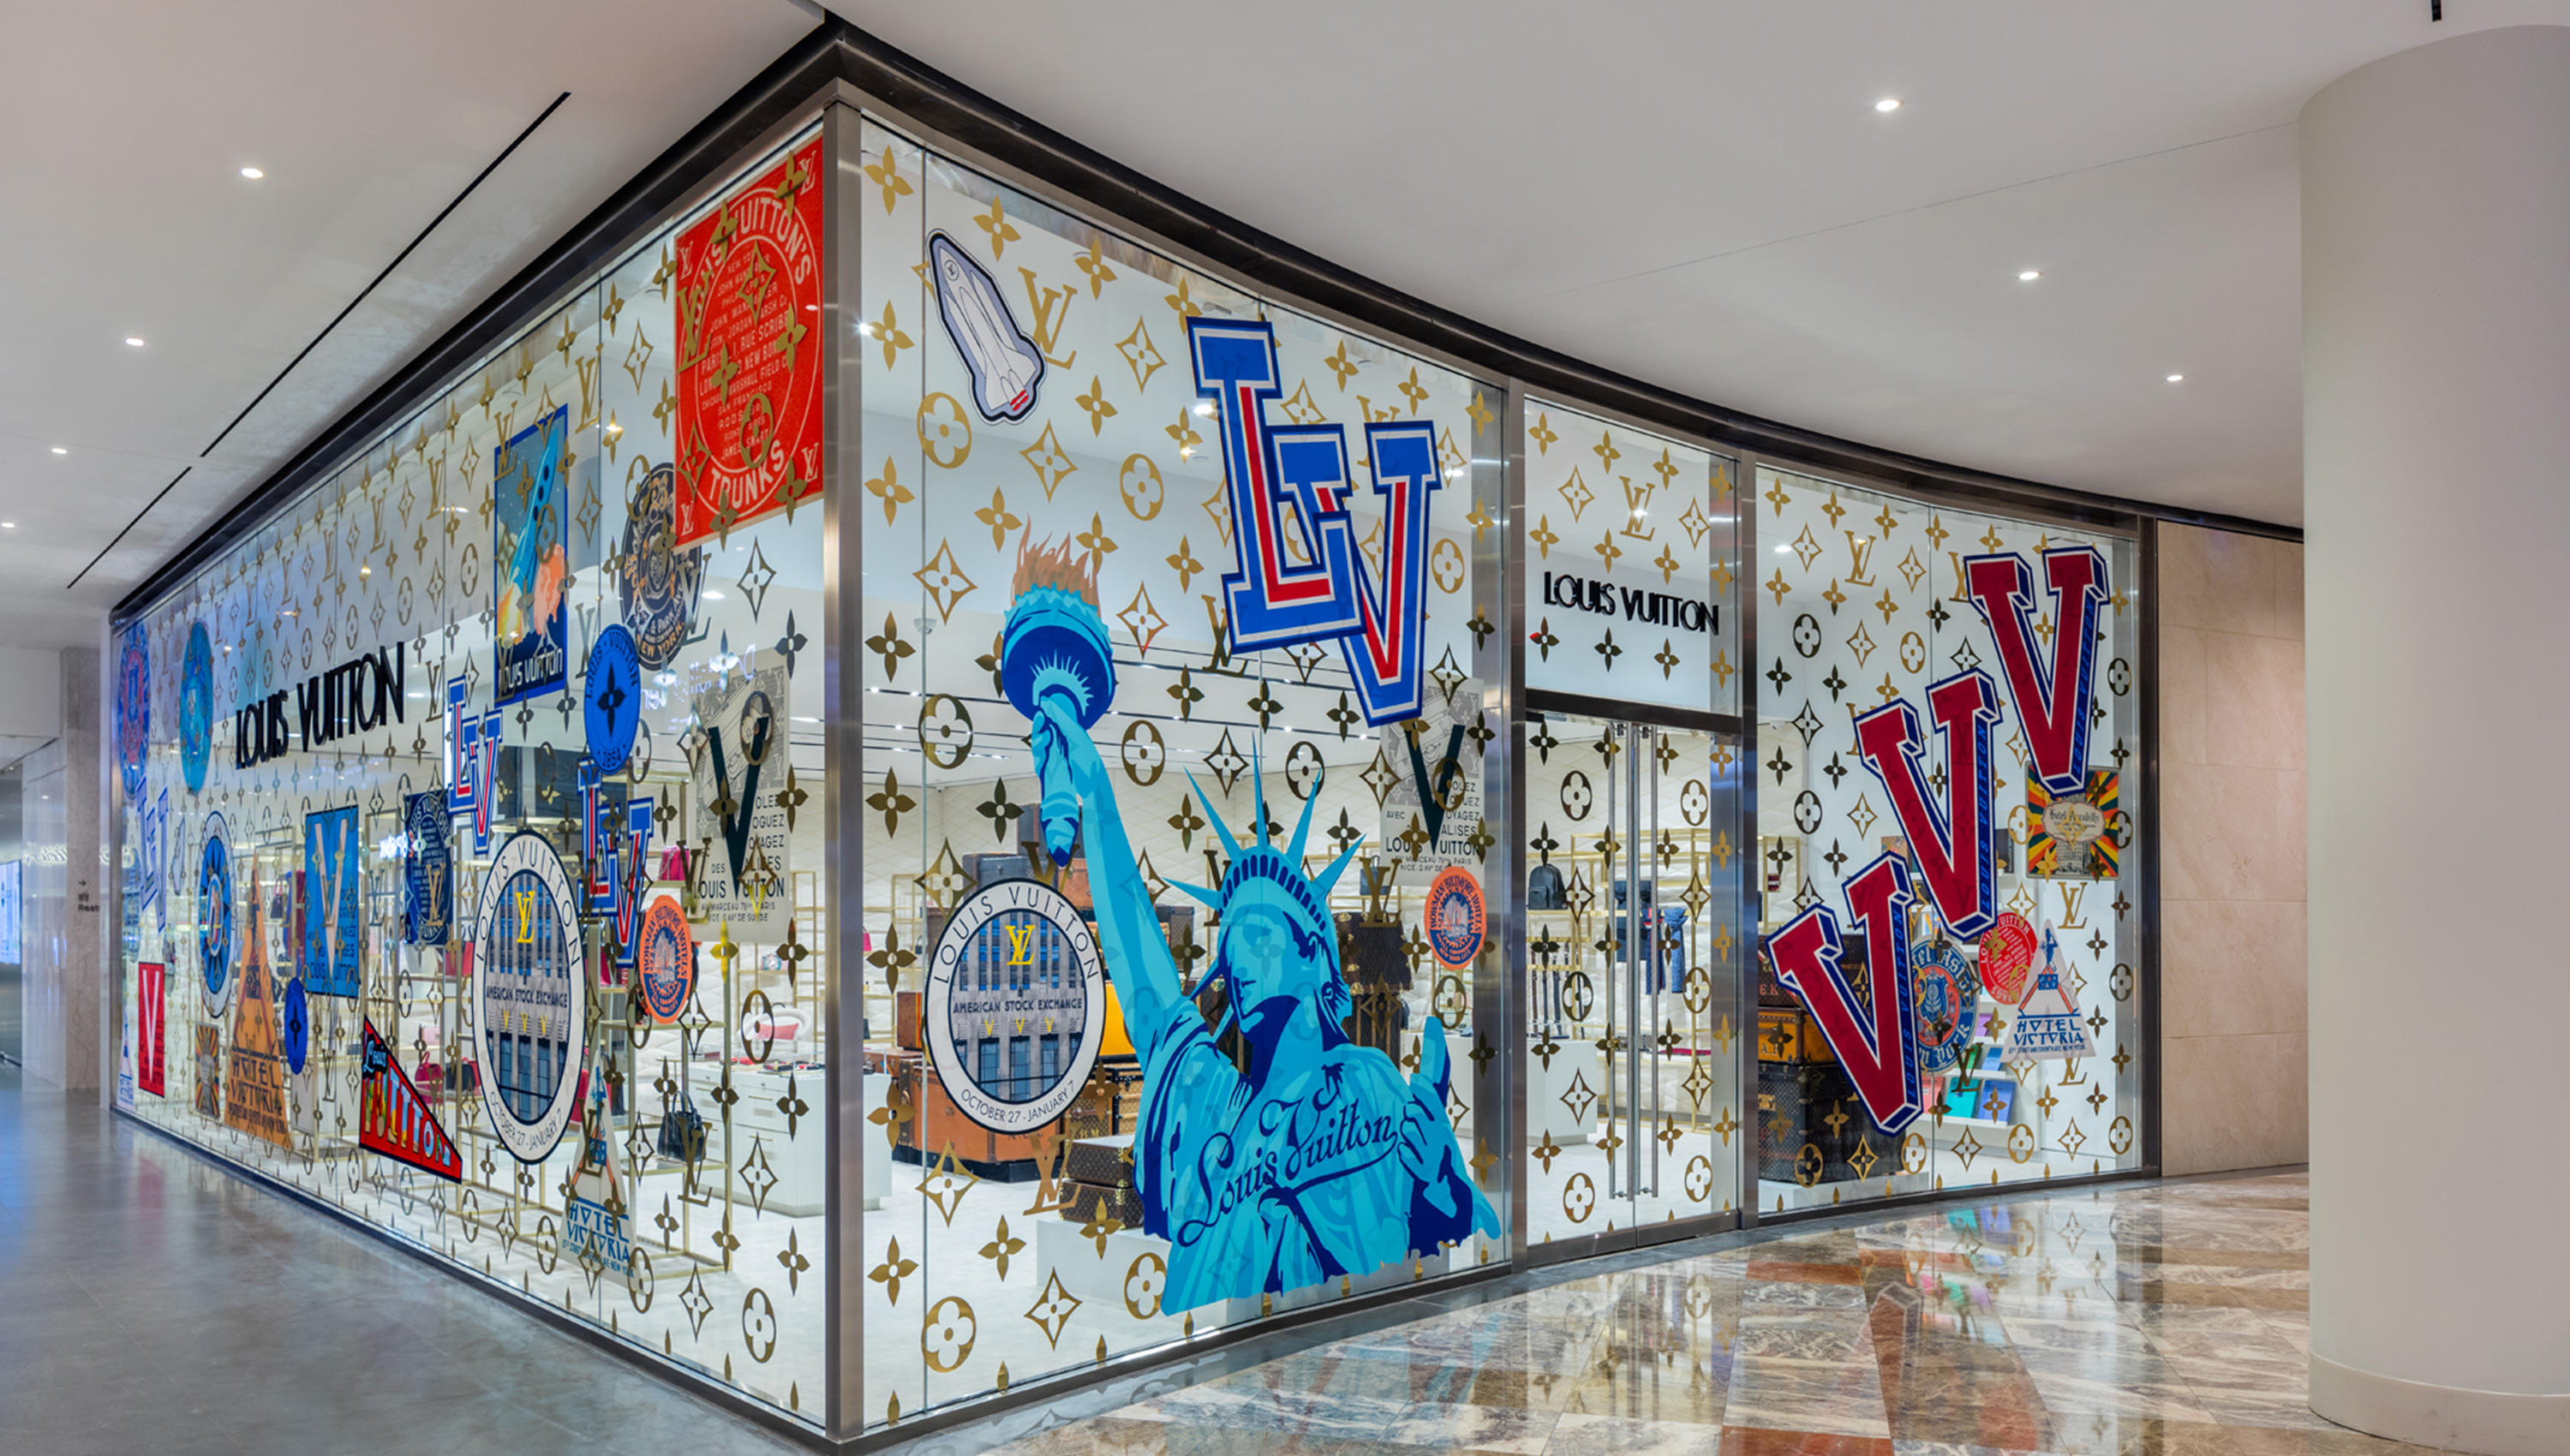 The Louis Vuitton pop-up store in the Brookfield Place mall in New